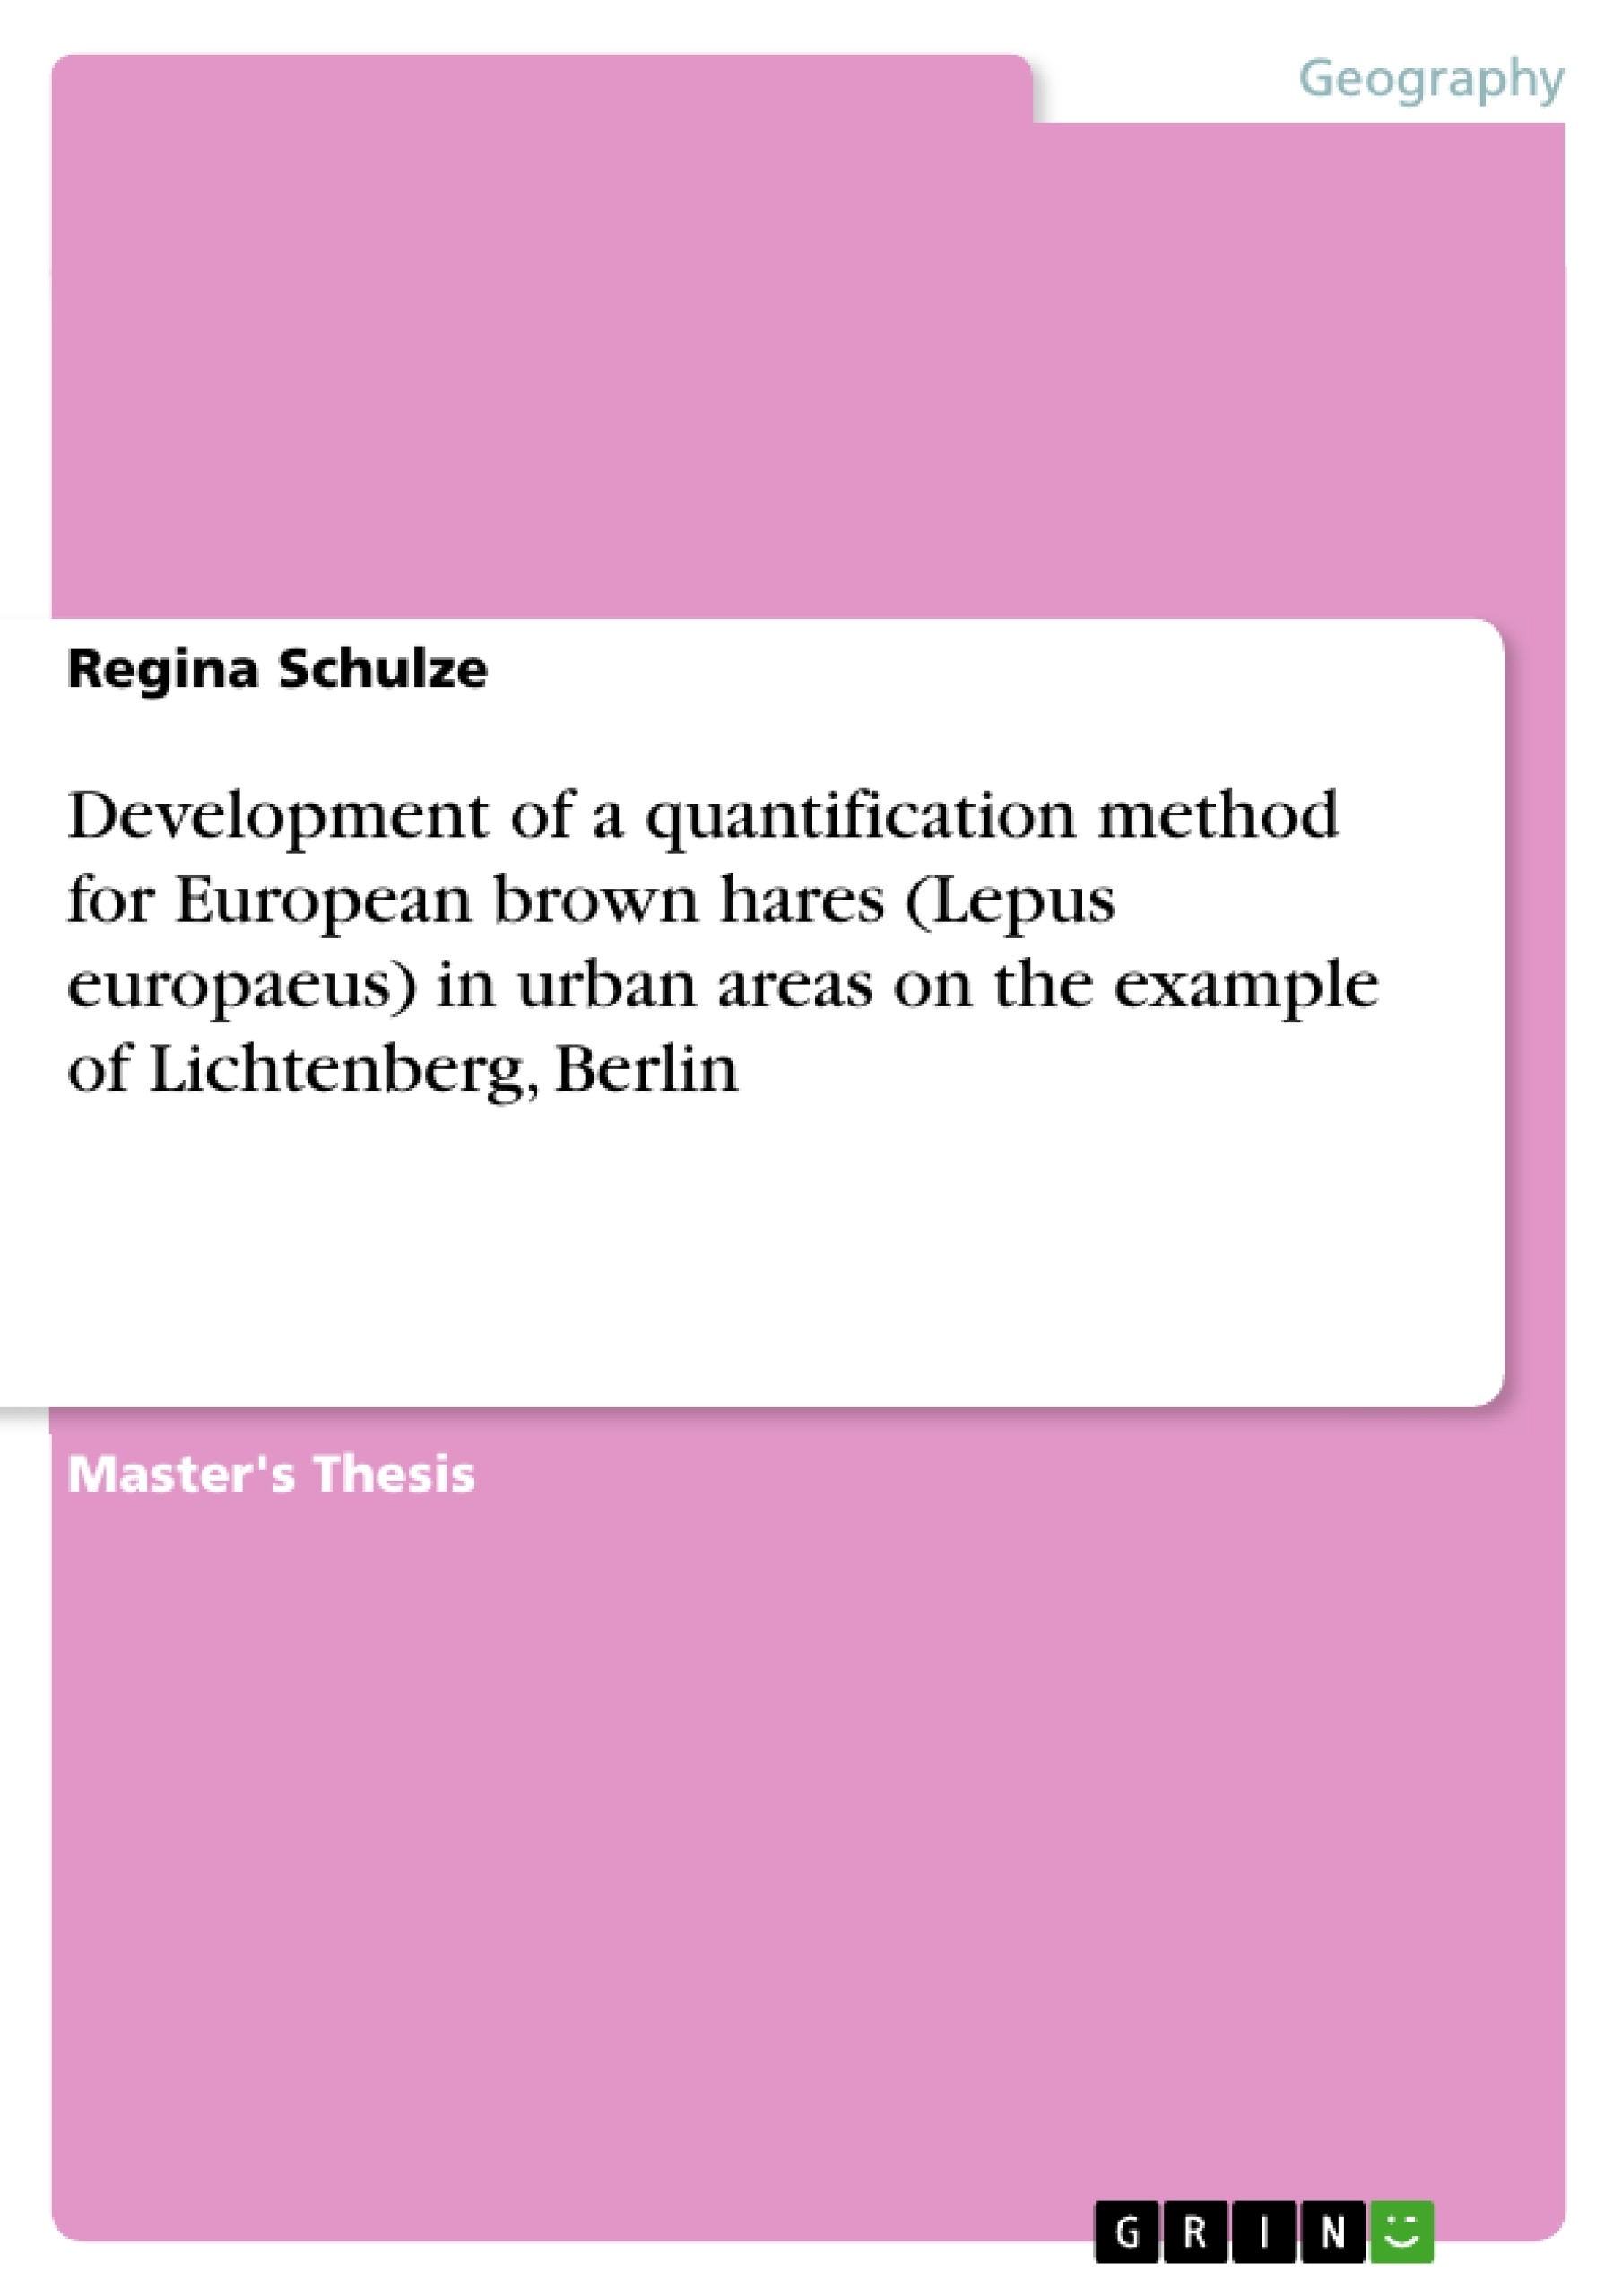 Título: Development of a quantification method for European brown hares (Lepus europaeus) in urban areas on the example of Lichtenberg, Berlin